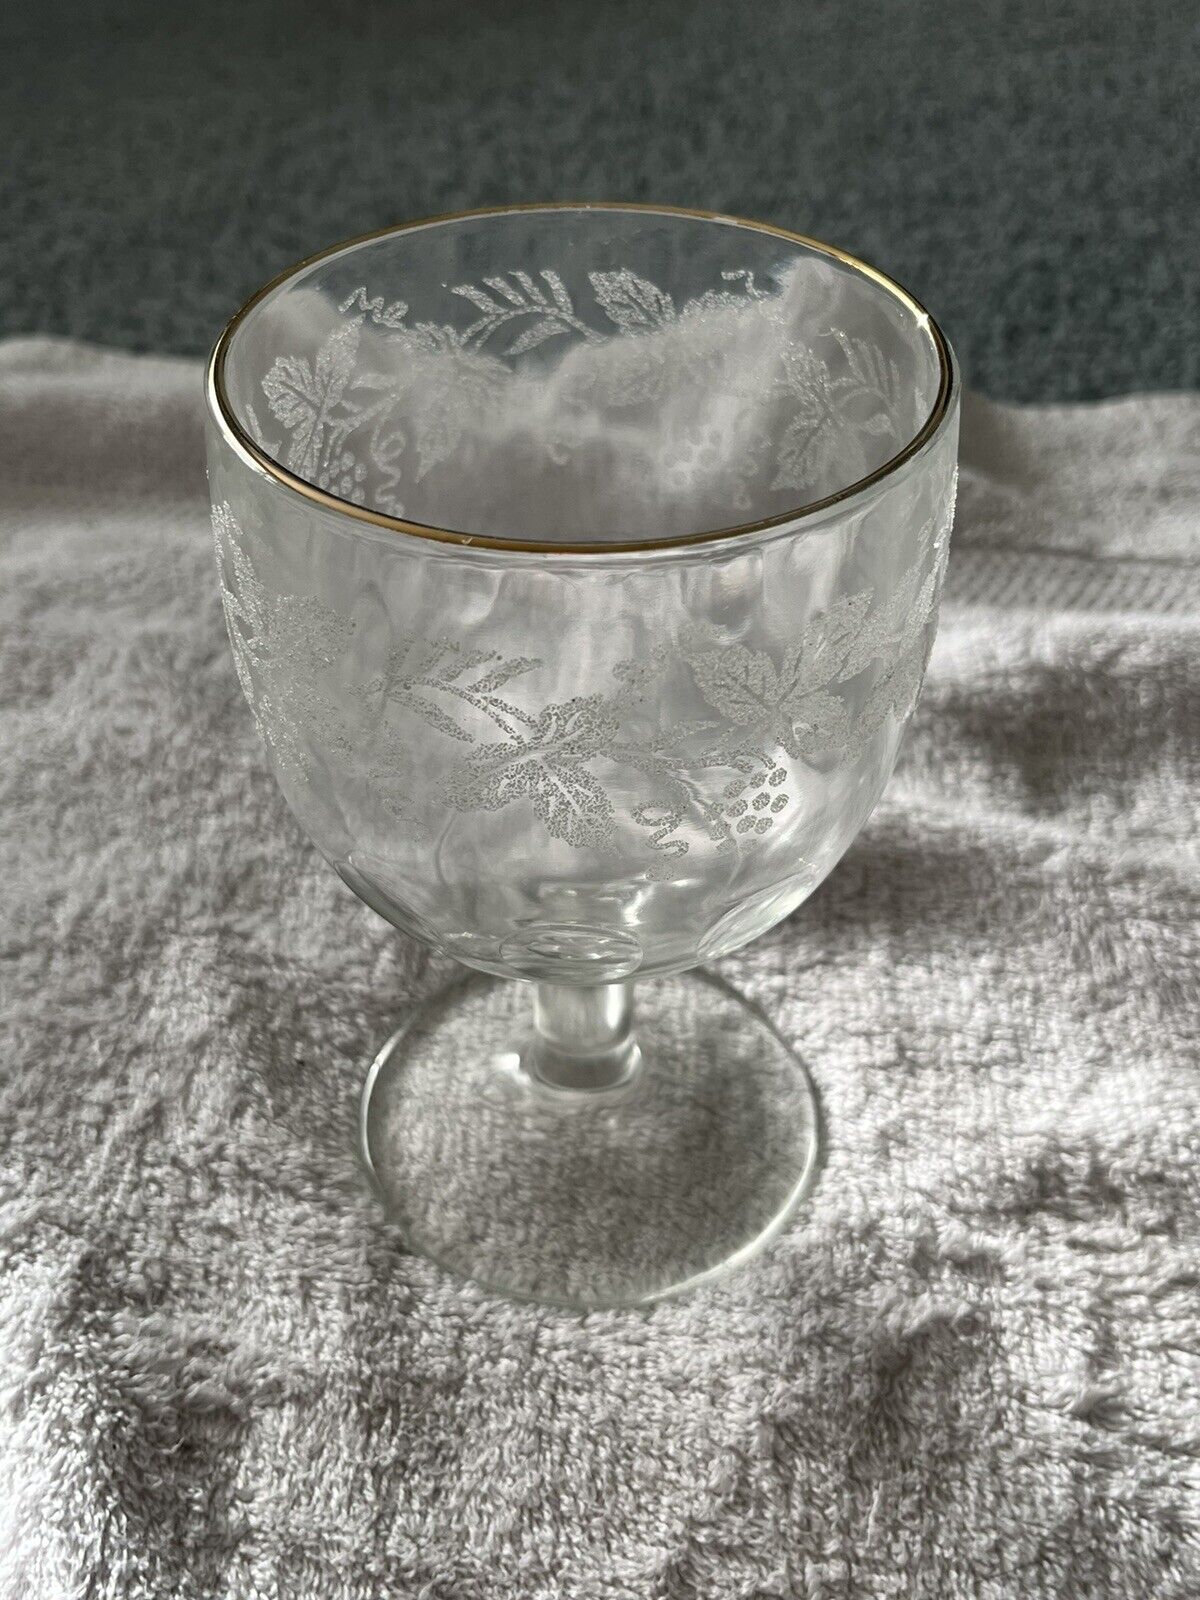 ANTIQUE VICTORIAN EARLY GLASS GOBLET CHALICE WITH FLORAL DECORATION